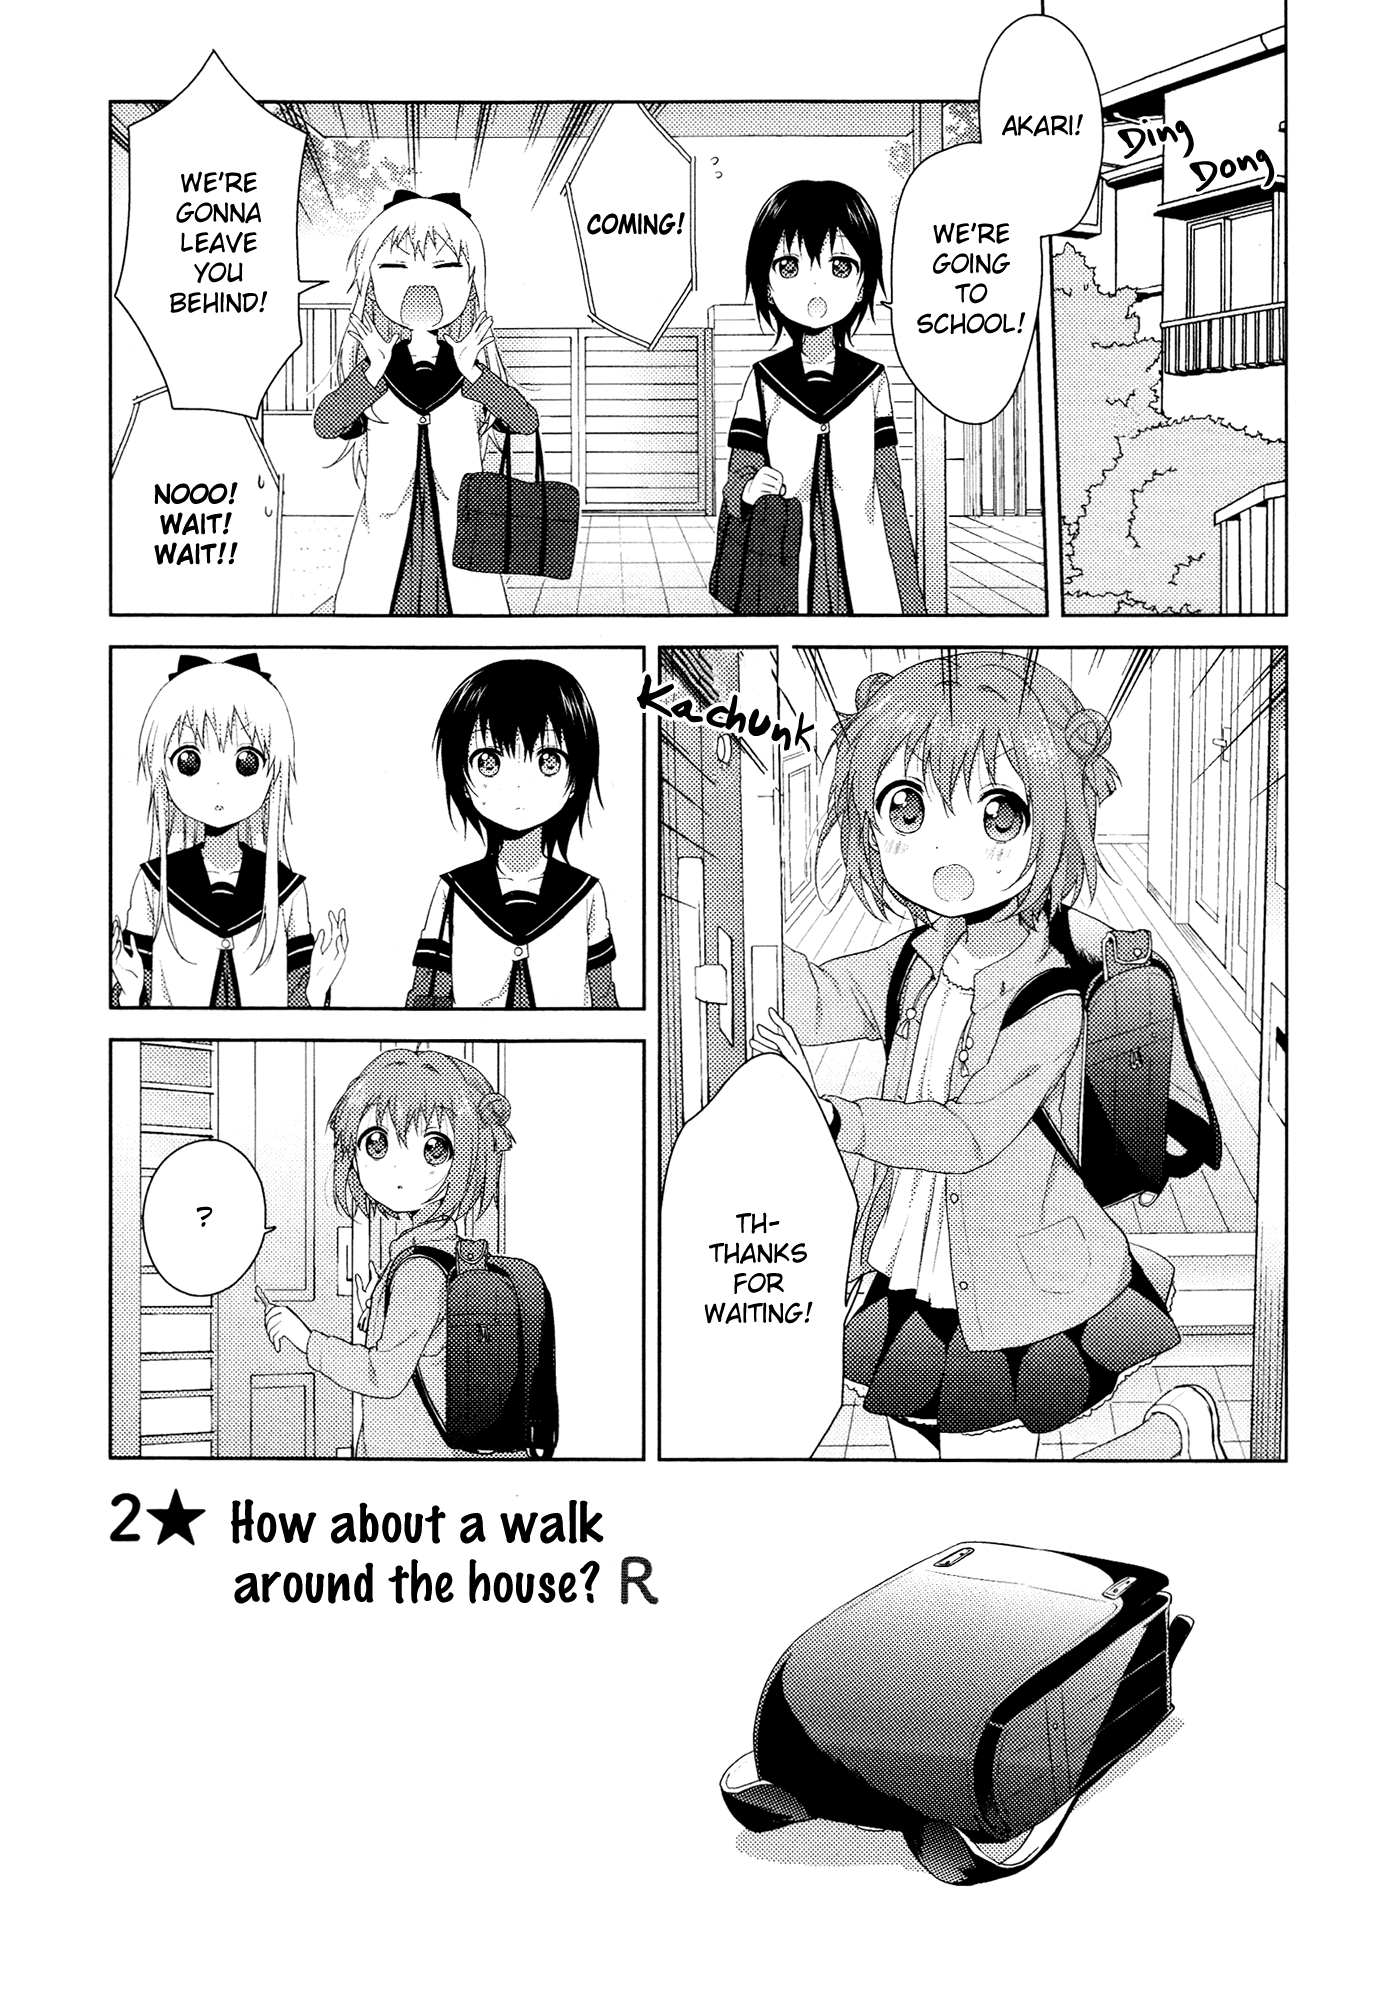 Yuru Yuri Vol.11 Chapter 78.7: Beginnings R2: How About A Walk Around The House? - Picture 2